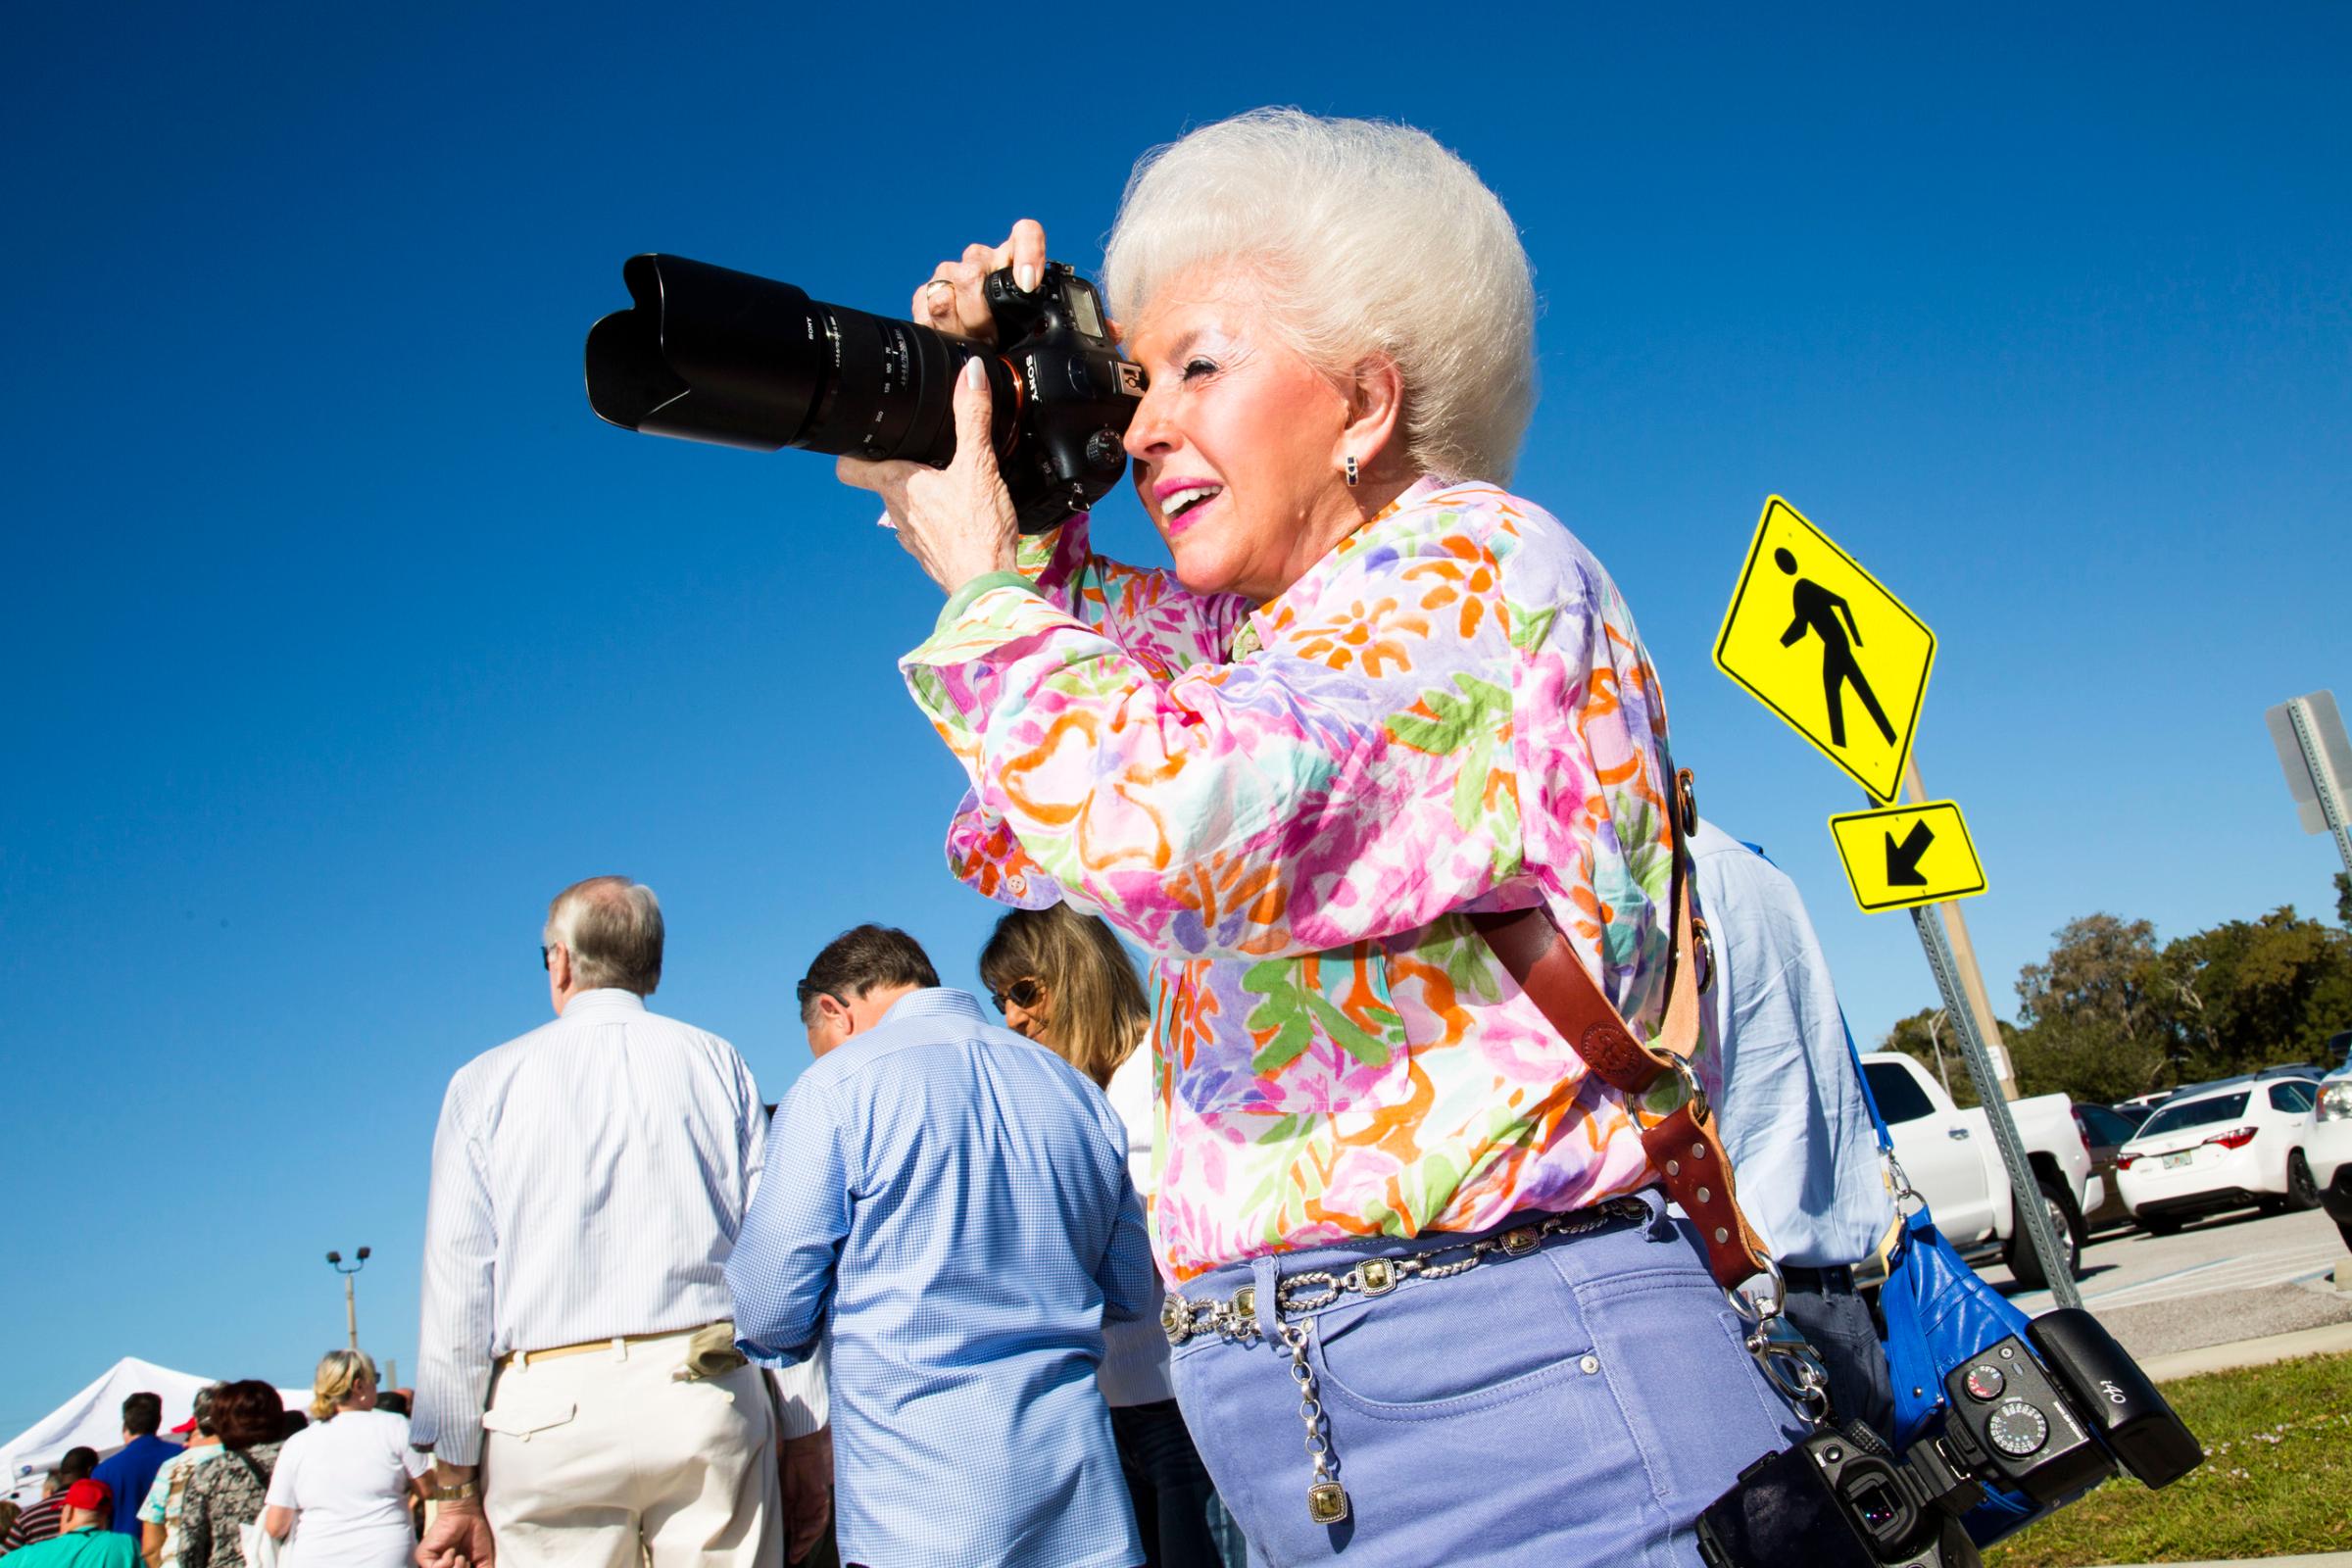 Supporter of Republican presidential candidate Donald Trump photographs at a Donald Trump rally in Sarasota, Fla. Nov. 28, 2015.